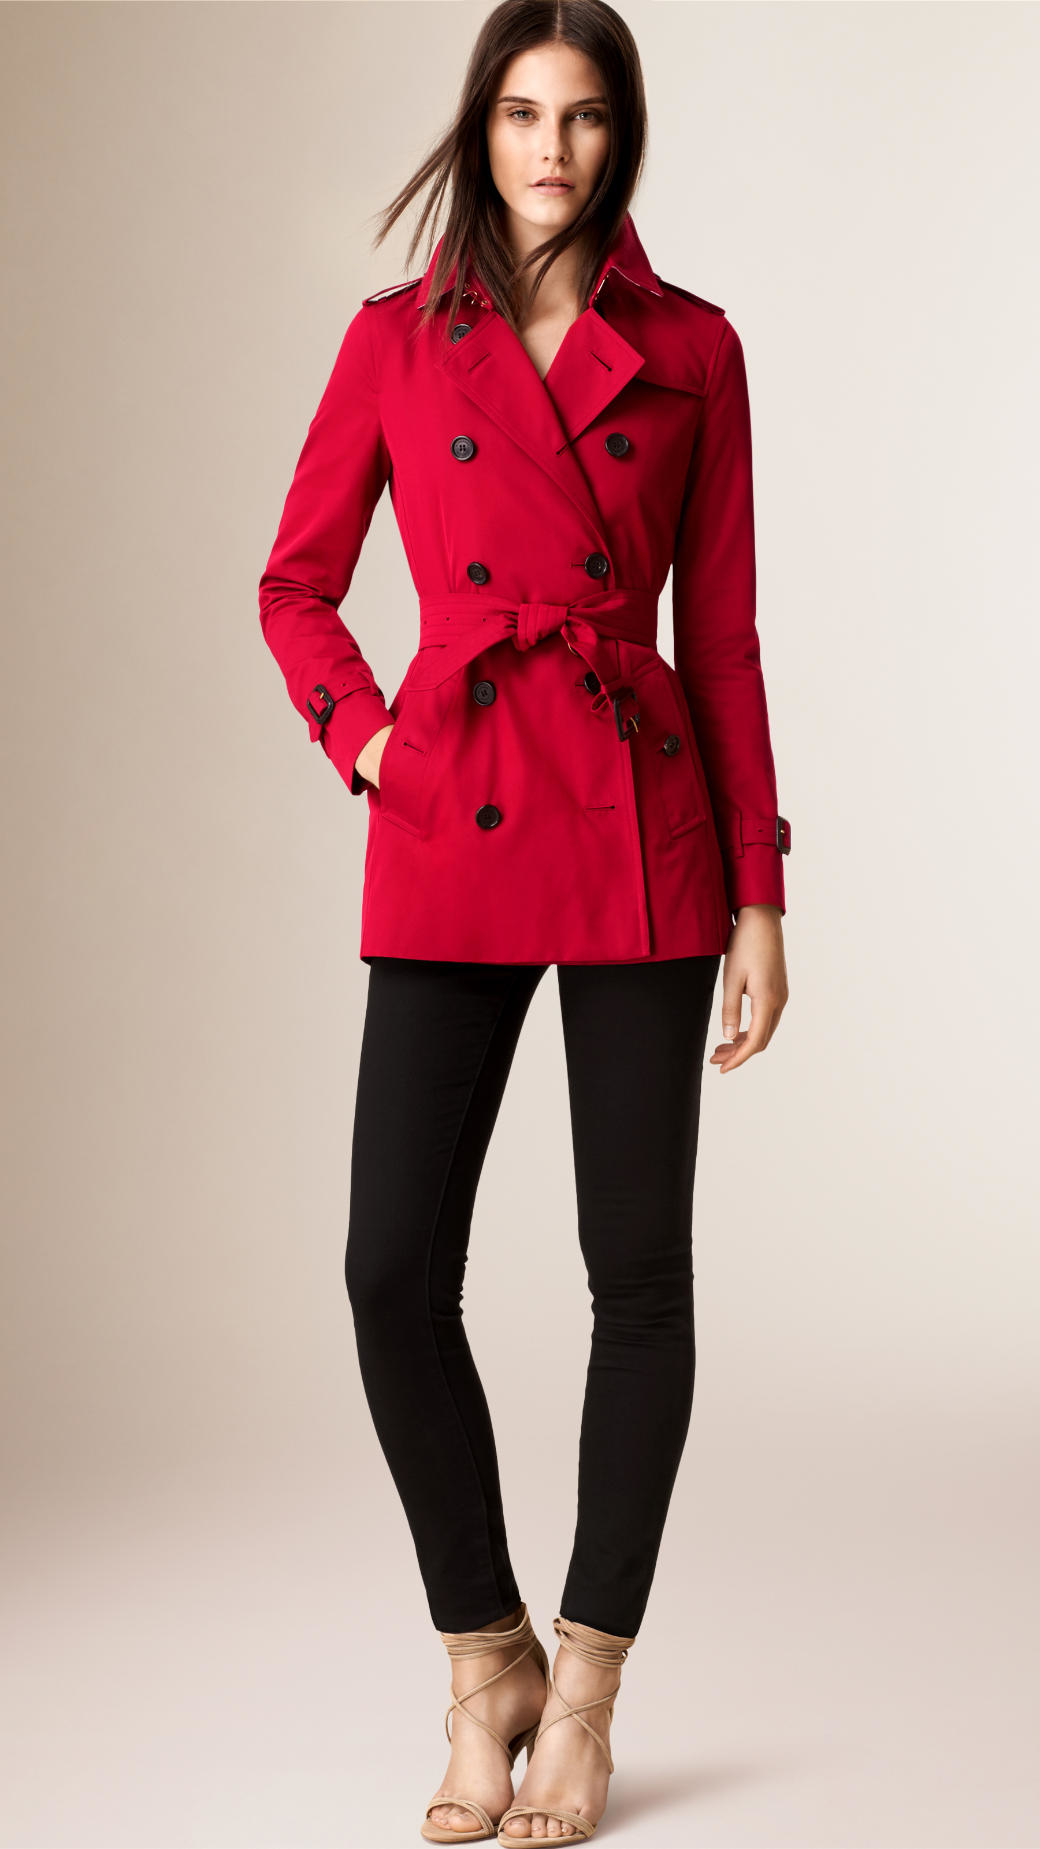 Lyst - Burberry The Kensington - Short Heritage Trench Coat in Red